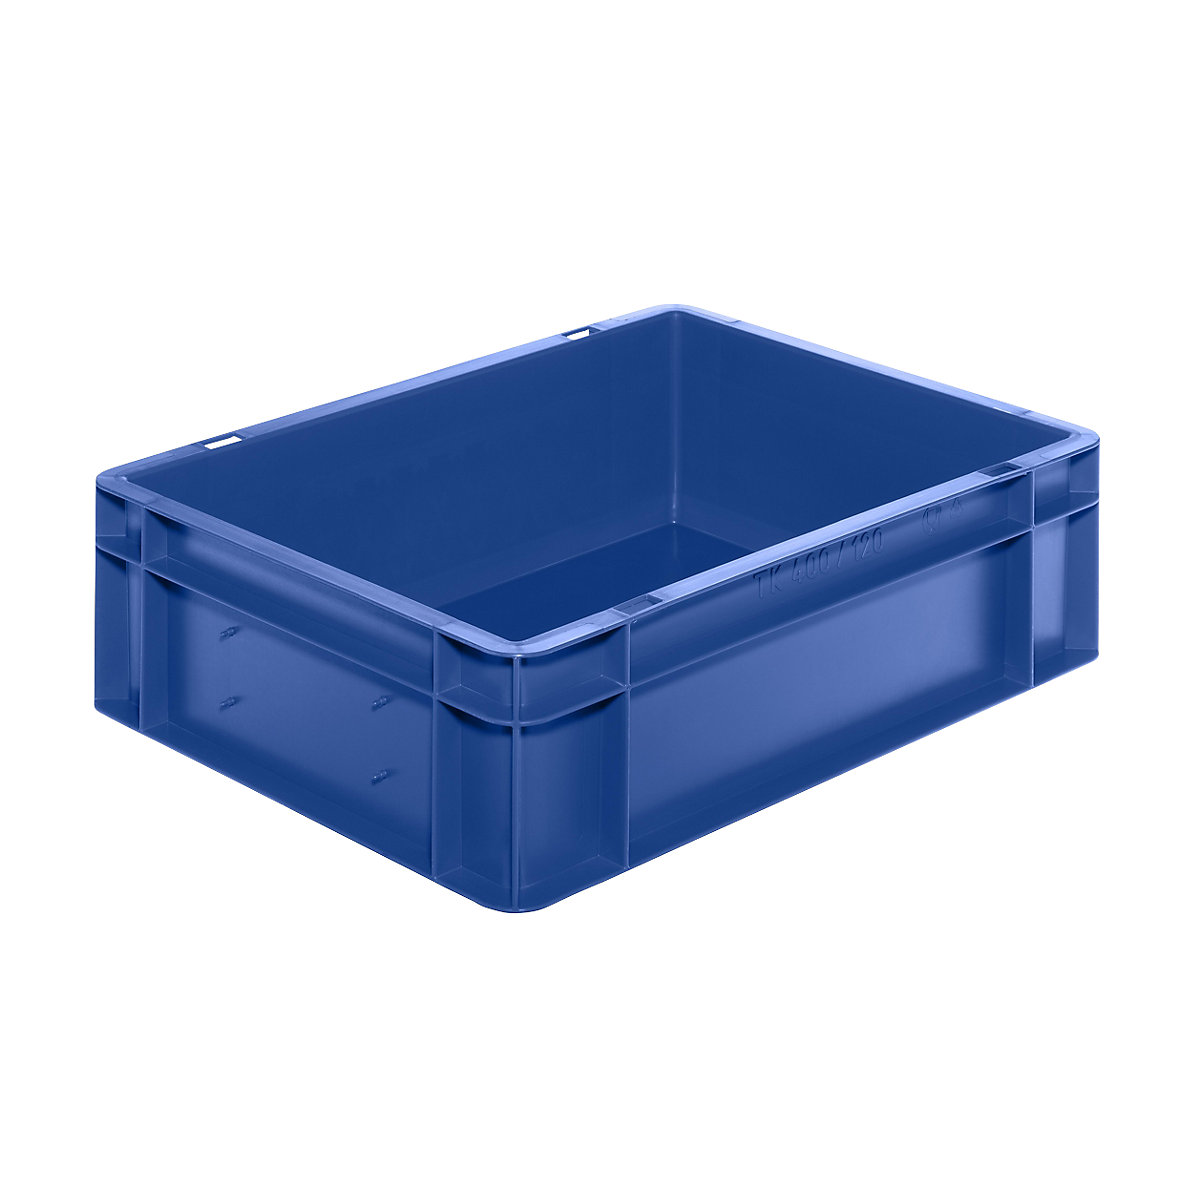 Euro stacking container, closed walls and base, LxWxH 400 x 300 x 120 mm, blue, pack of 5-7